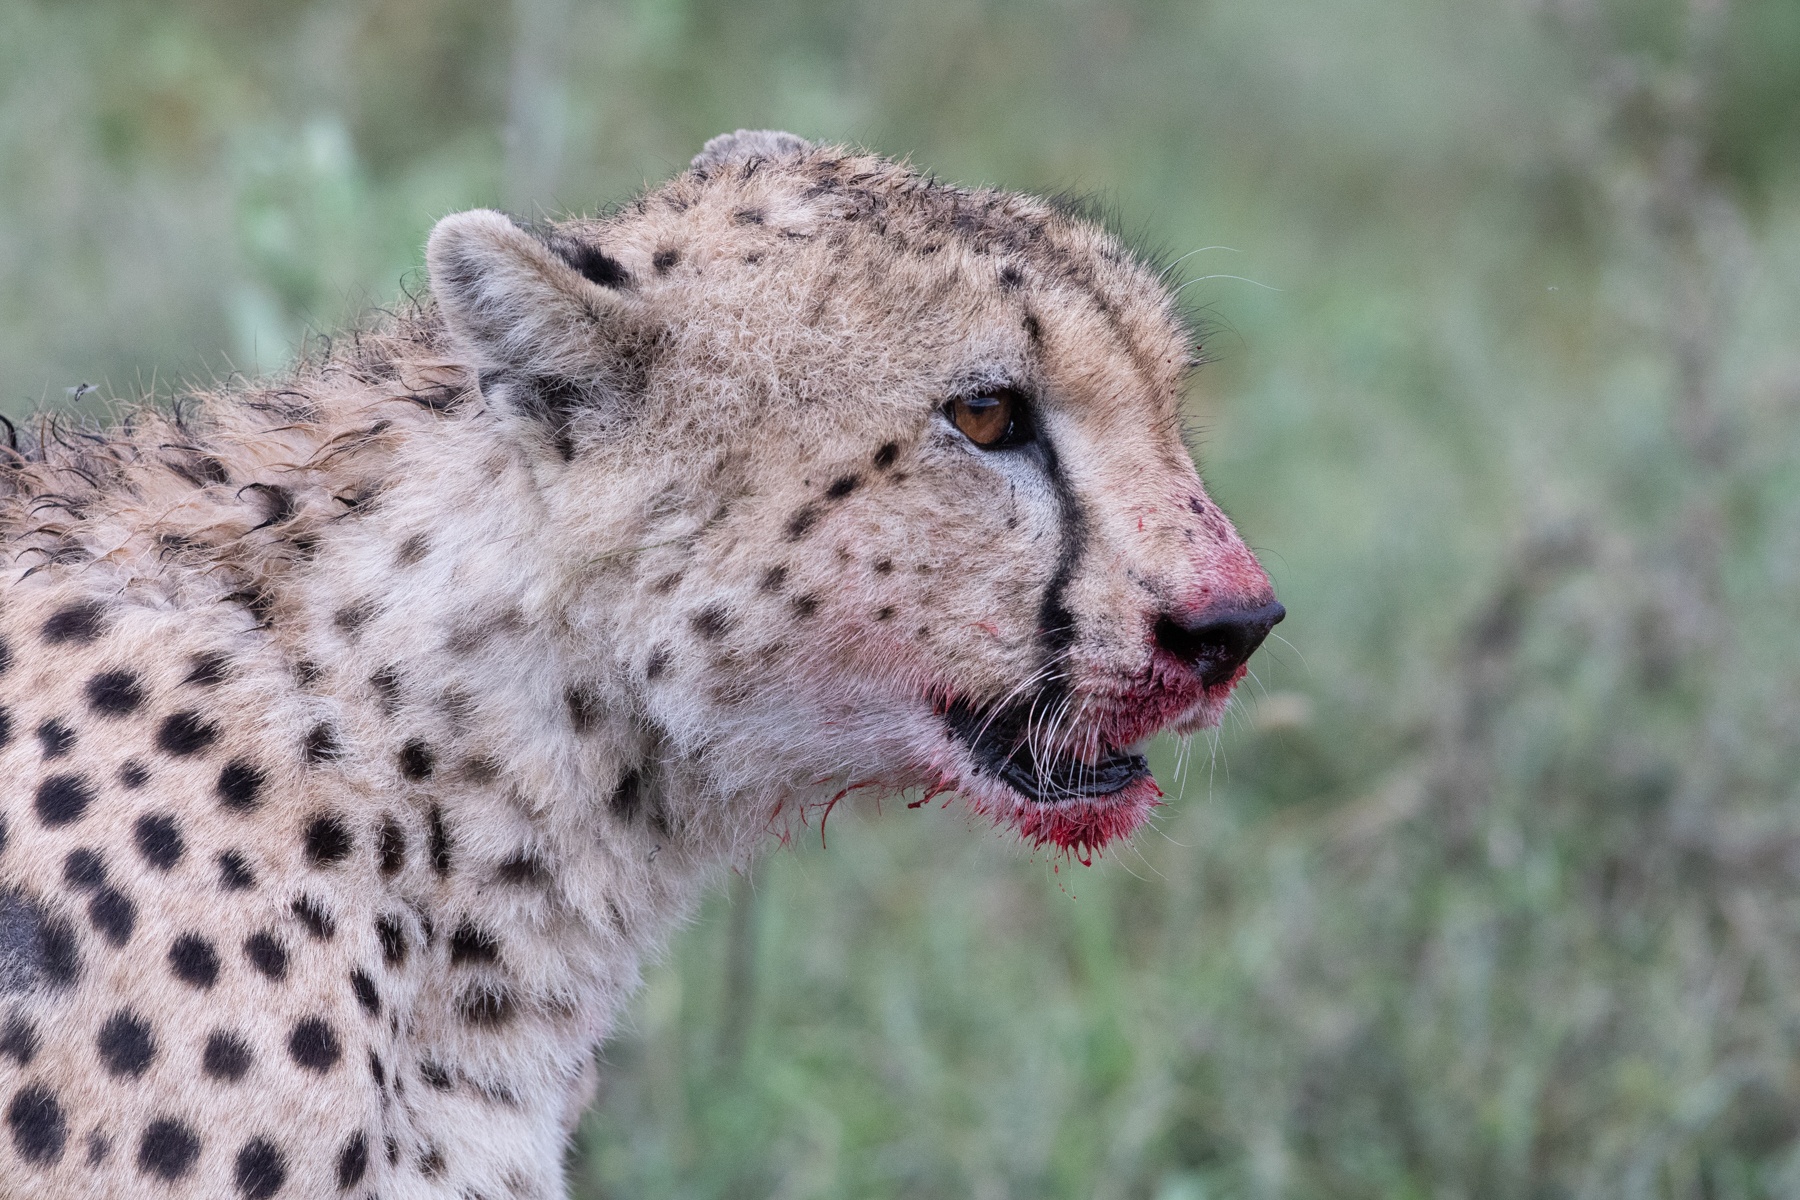 The bloodied face of a male cheetah after he hunted a young wildebeest